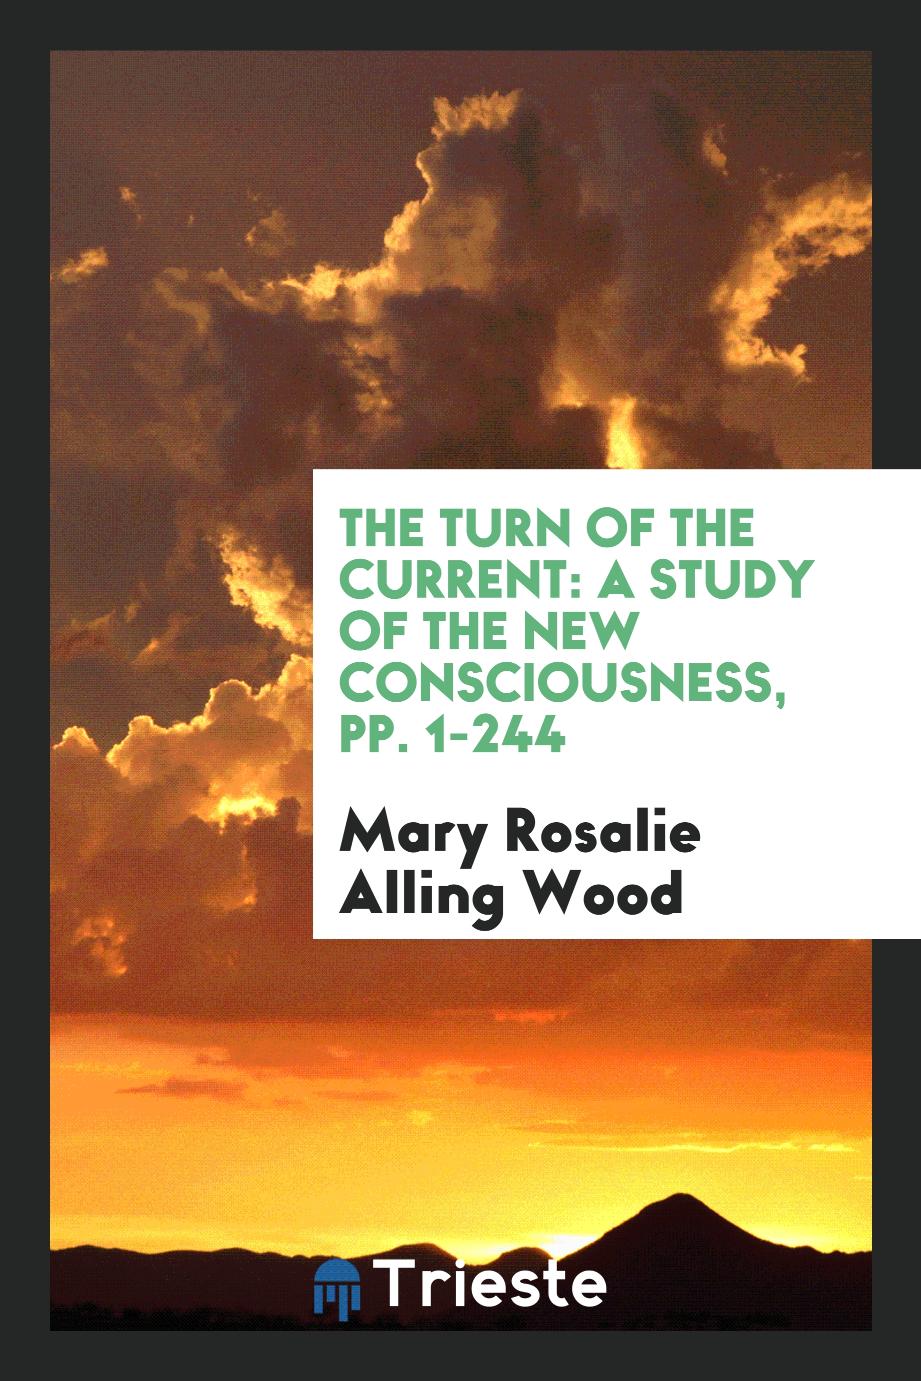 The Turn of the Current: A Study of the New Consciousness, pp. 1-244